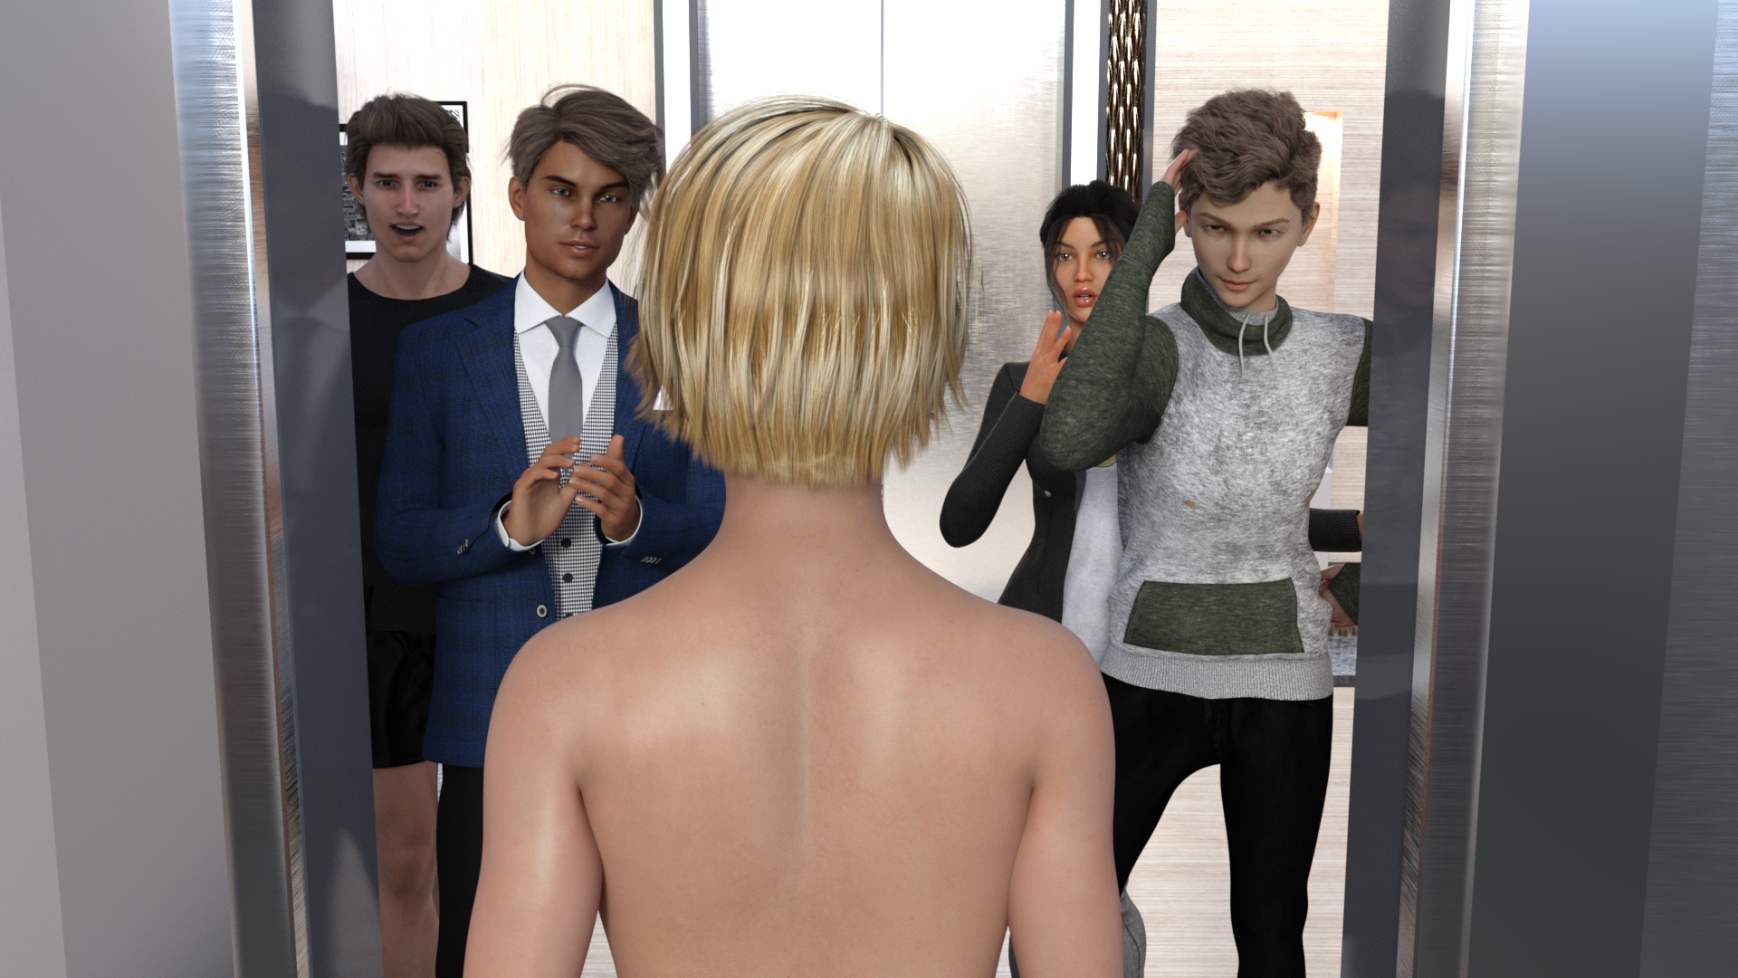 Unleash Your Inner Exhibitionist with These Provocative Naked People Games